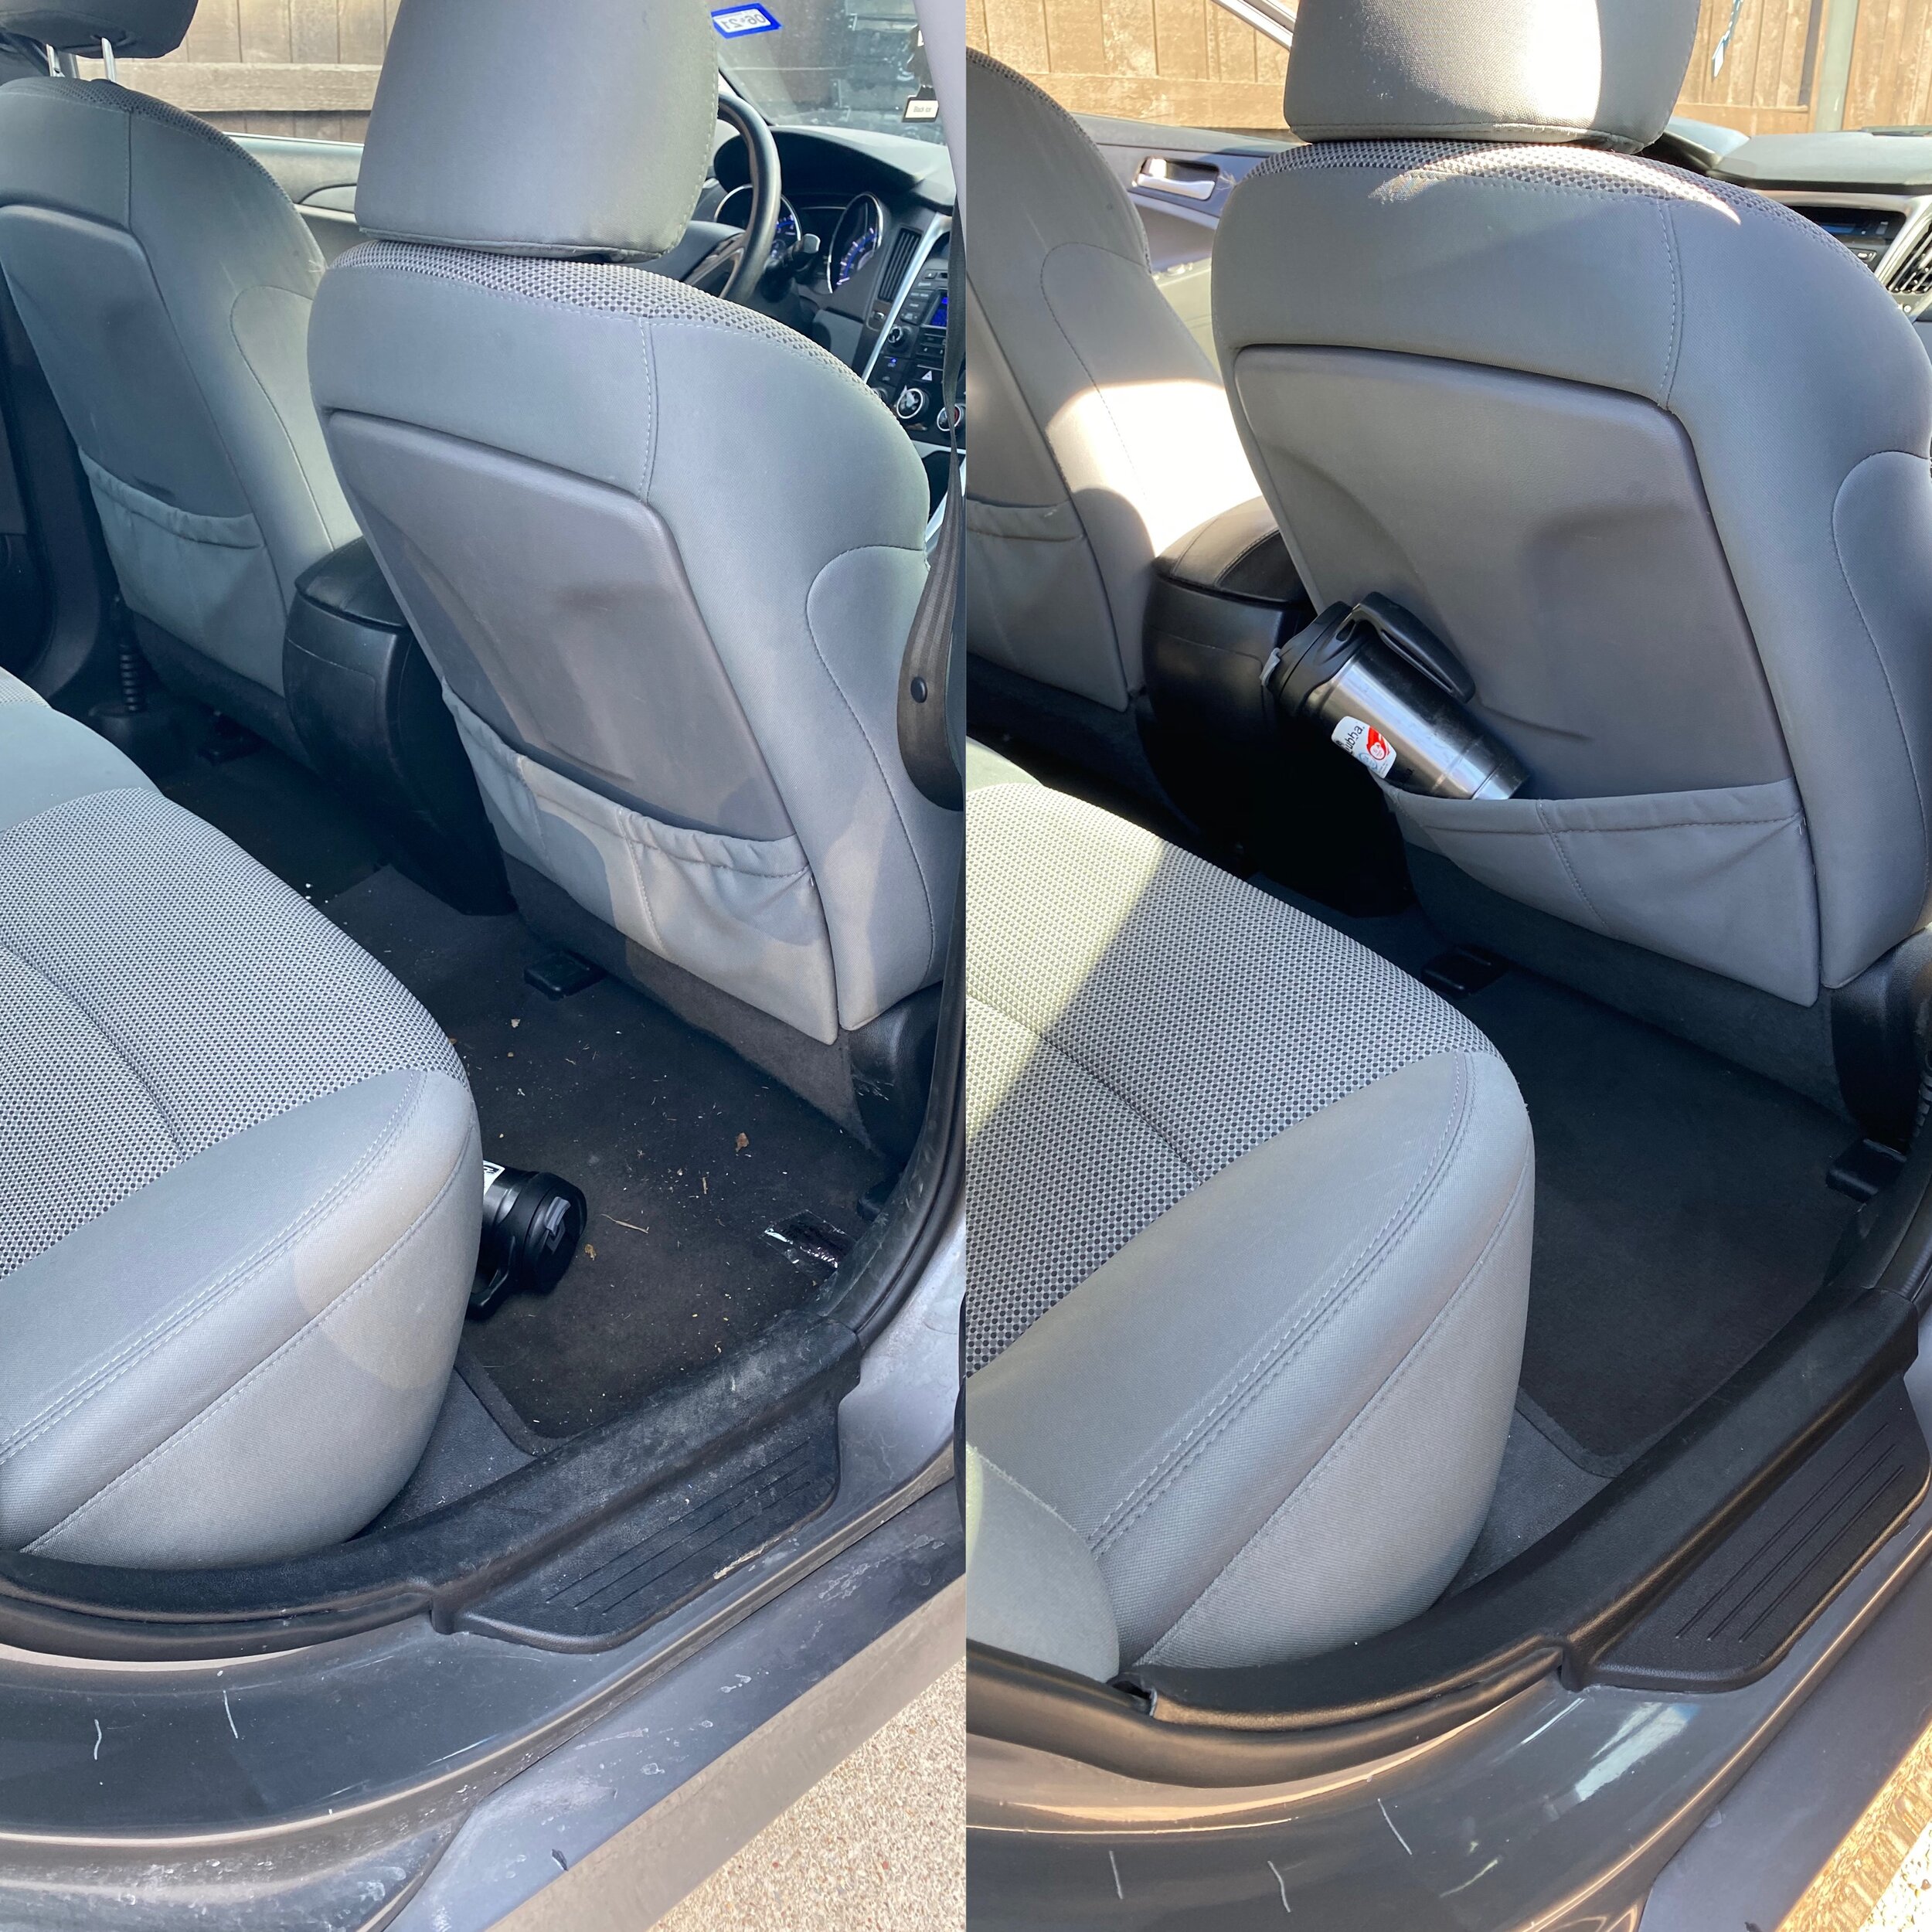 Full Car Interior Cleaning in Dallas - Sweet's Auto Detailing